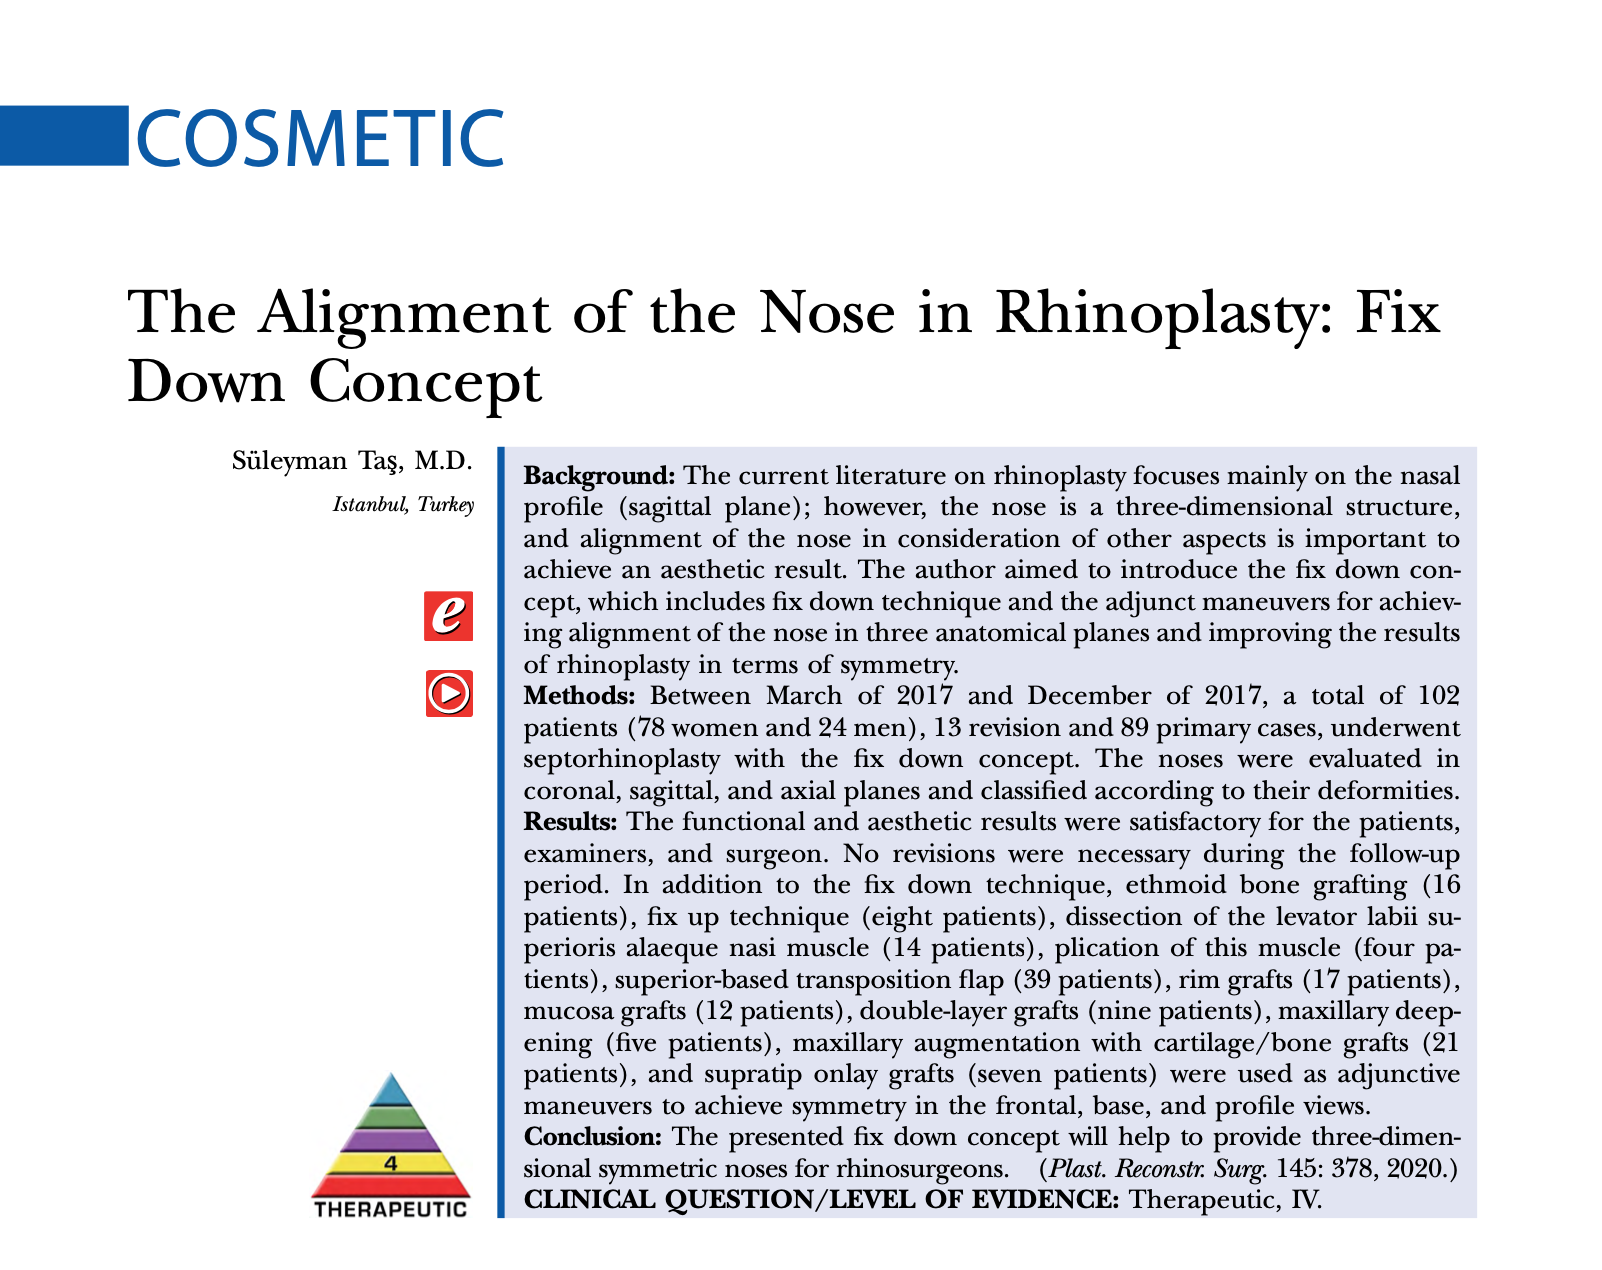 The alignment of the nose in rhinoplasty: fix down concept